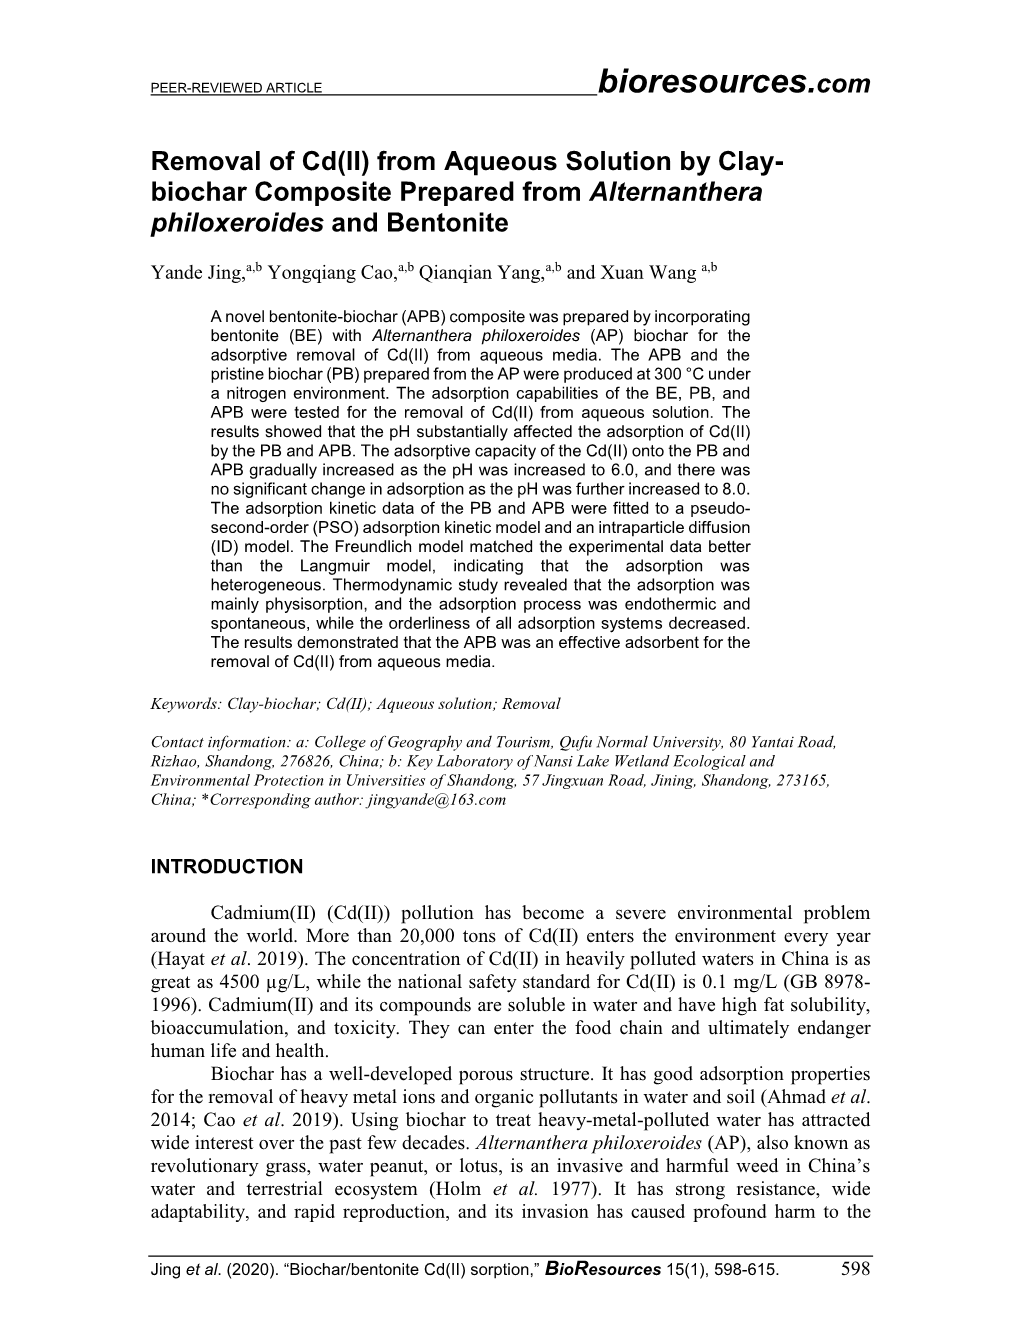 Removal of Cd(II) from Aqueous Solution by Clay- Biochar Composite Prepared from Alternanthera Philoxeroides and Bentonite